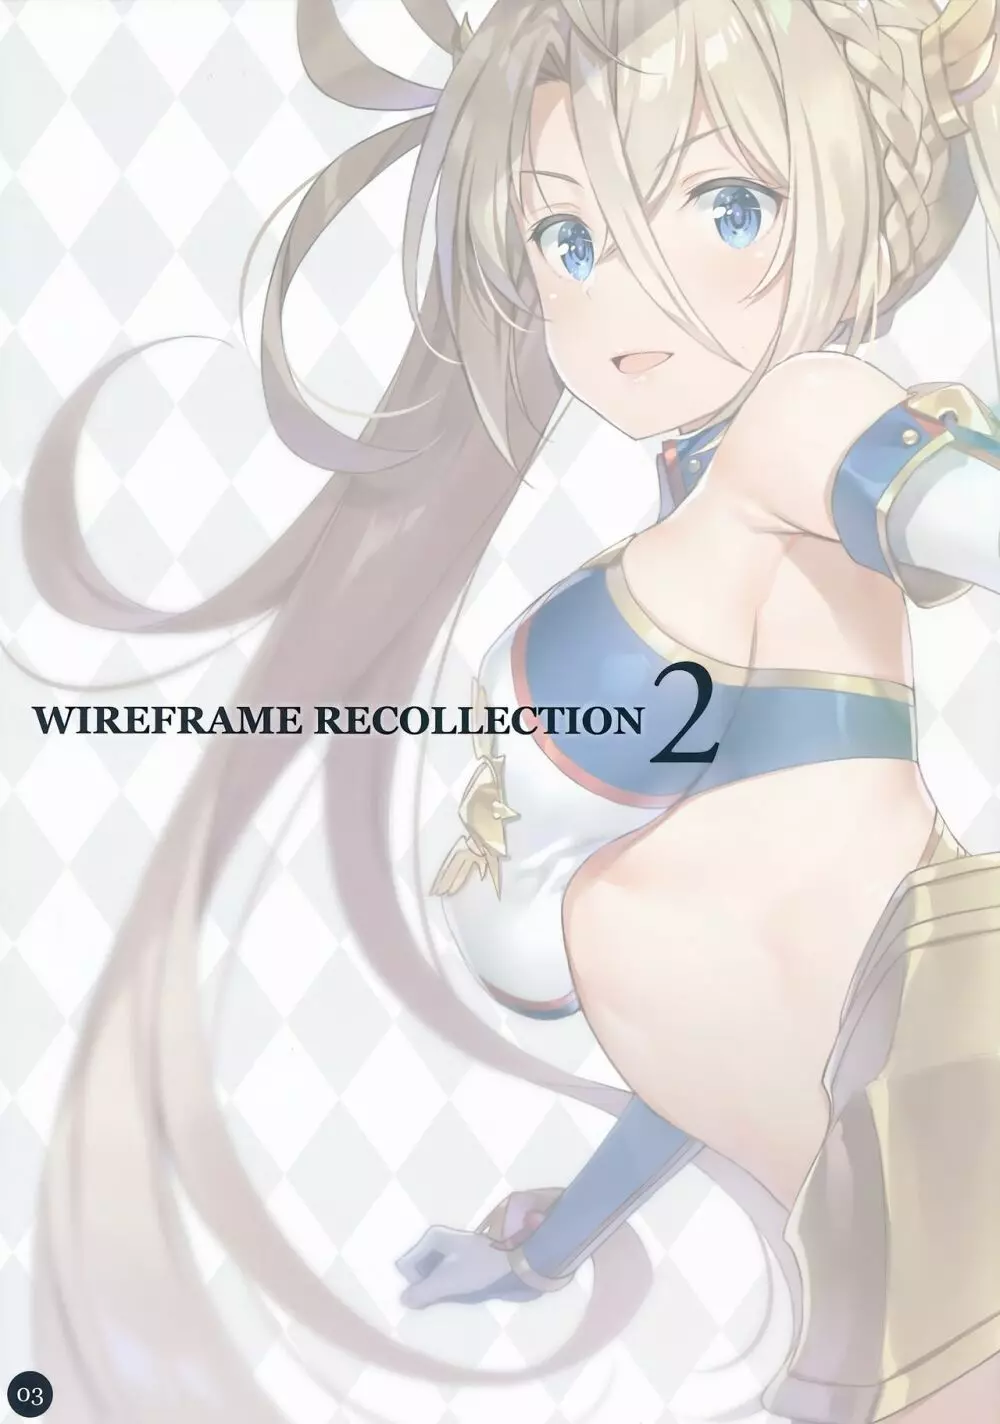 WIREFRAME RECOLLECTION 2 2ページ